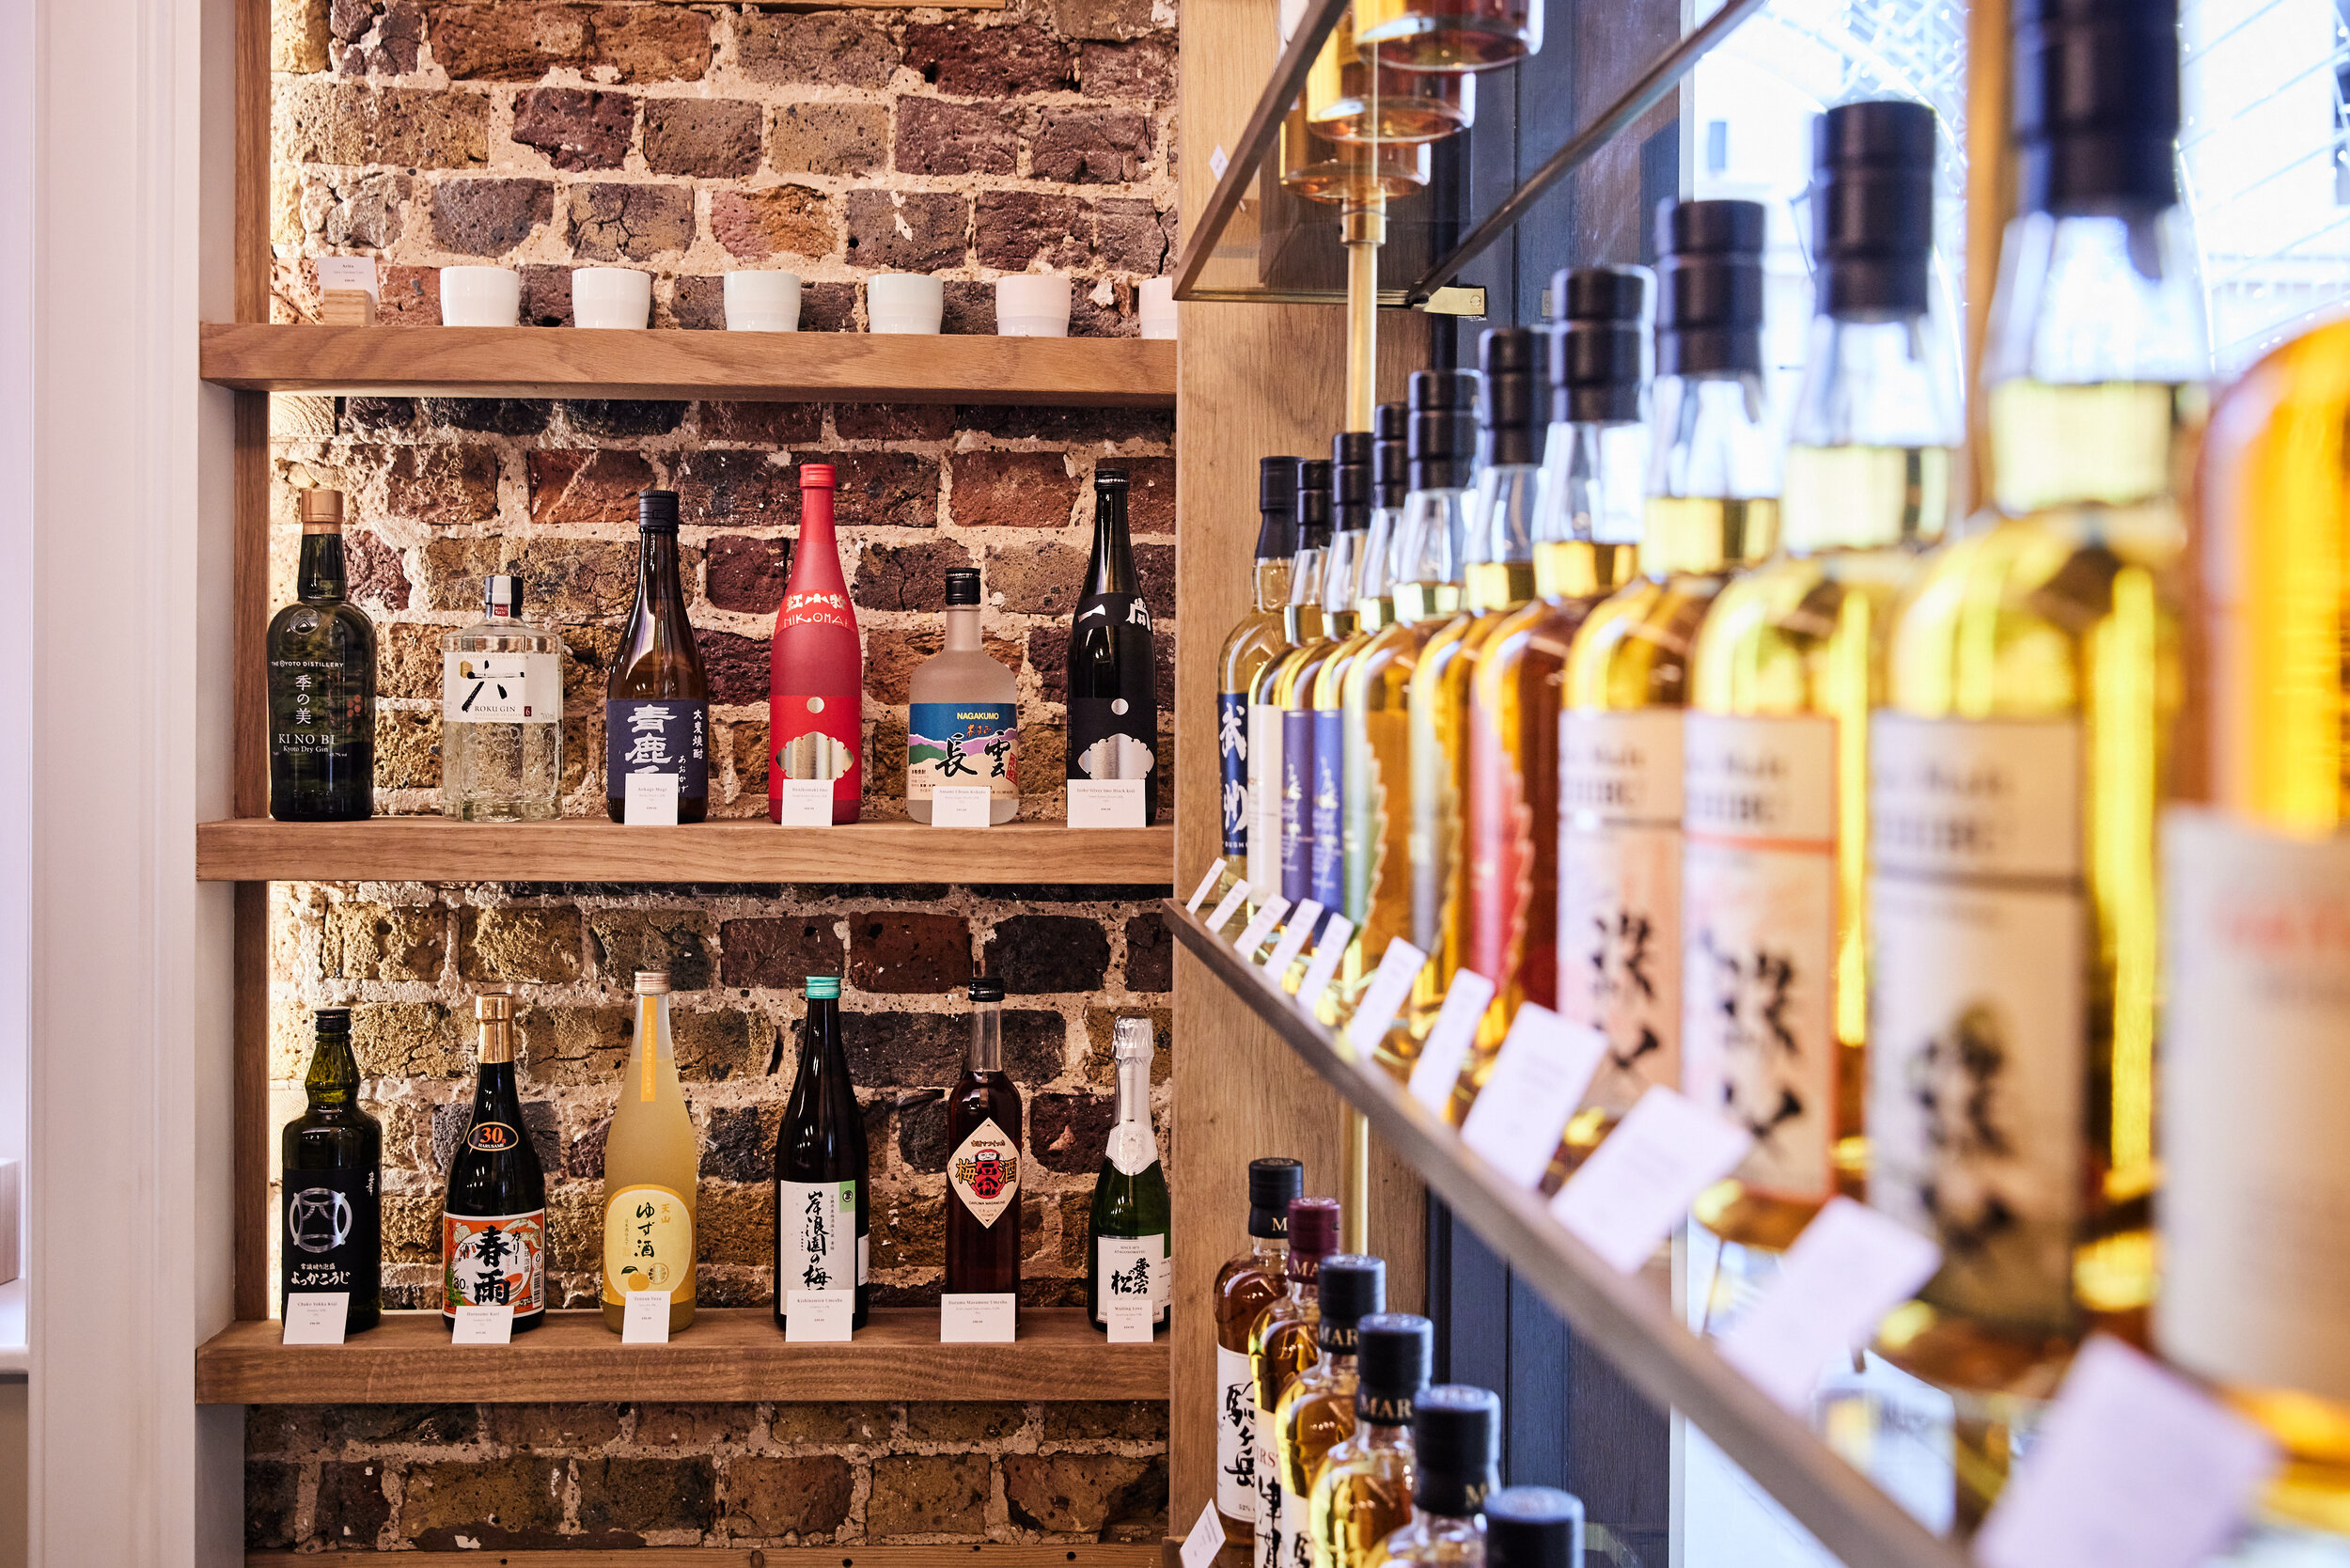 Sakaya specialist Japanese drinks shop and bar now open at Pantechnicon - image Charlie McKay (7).jpg